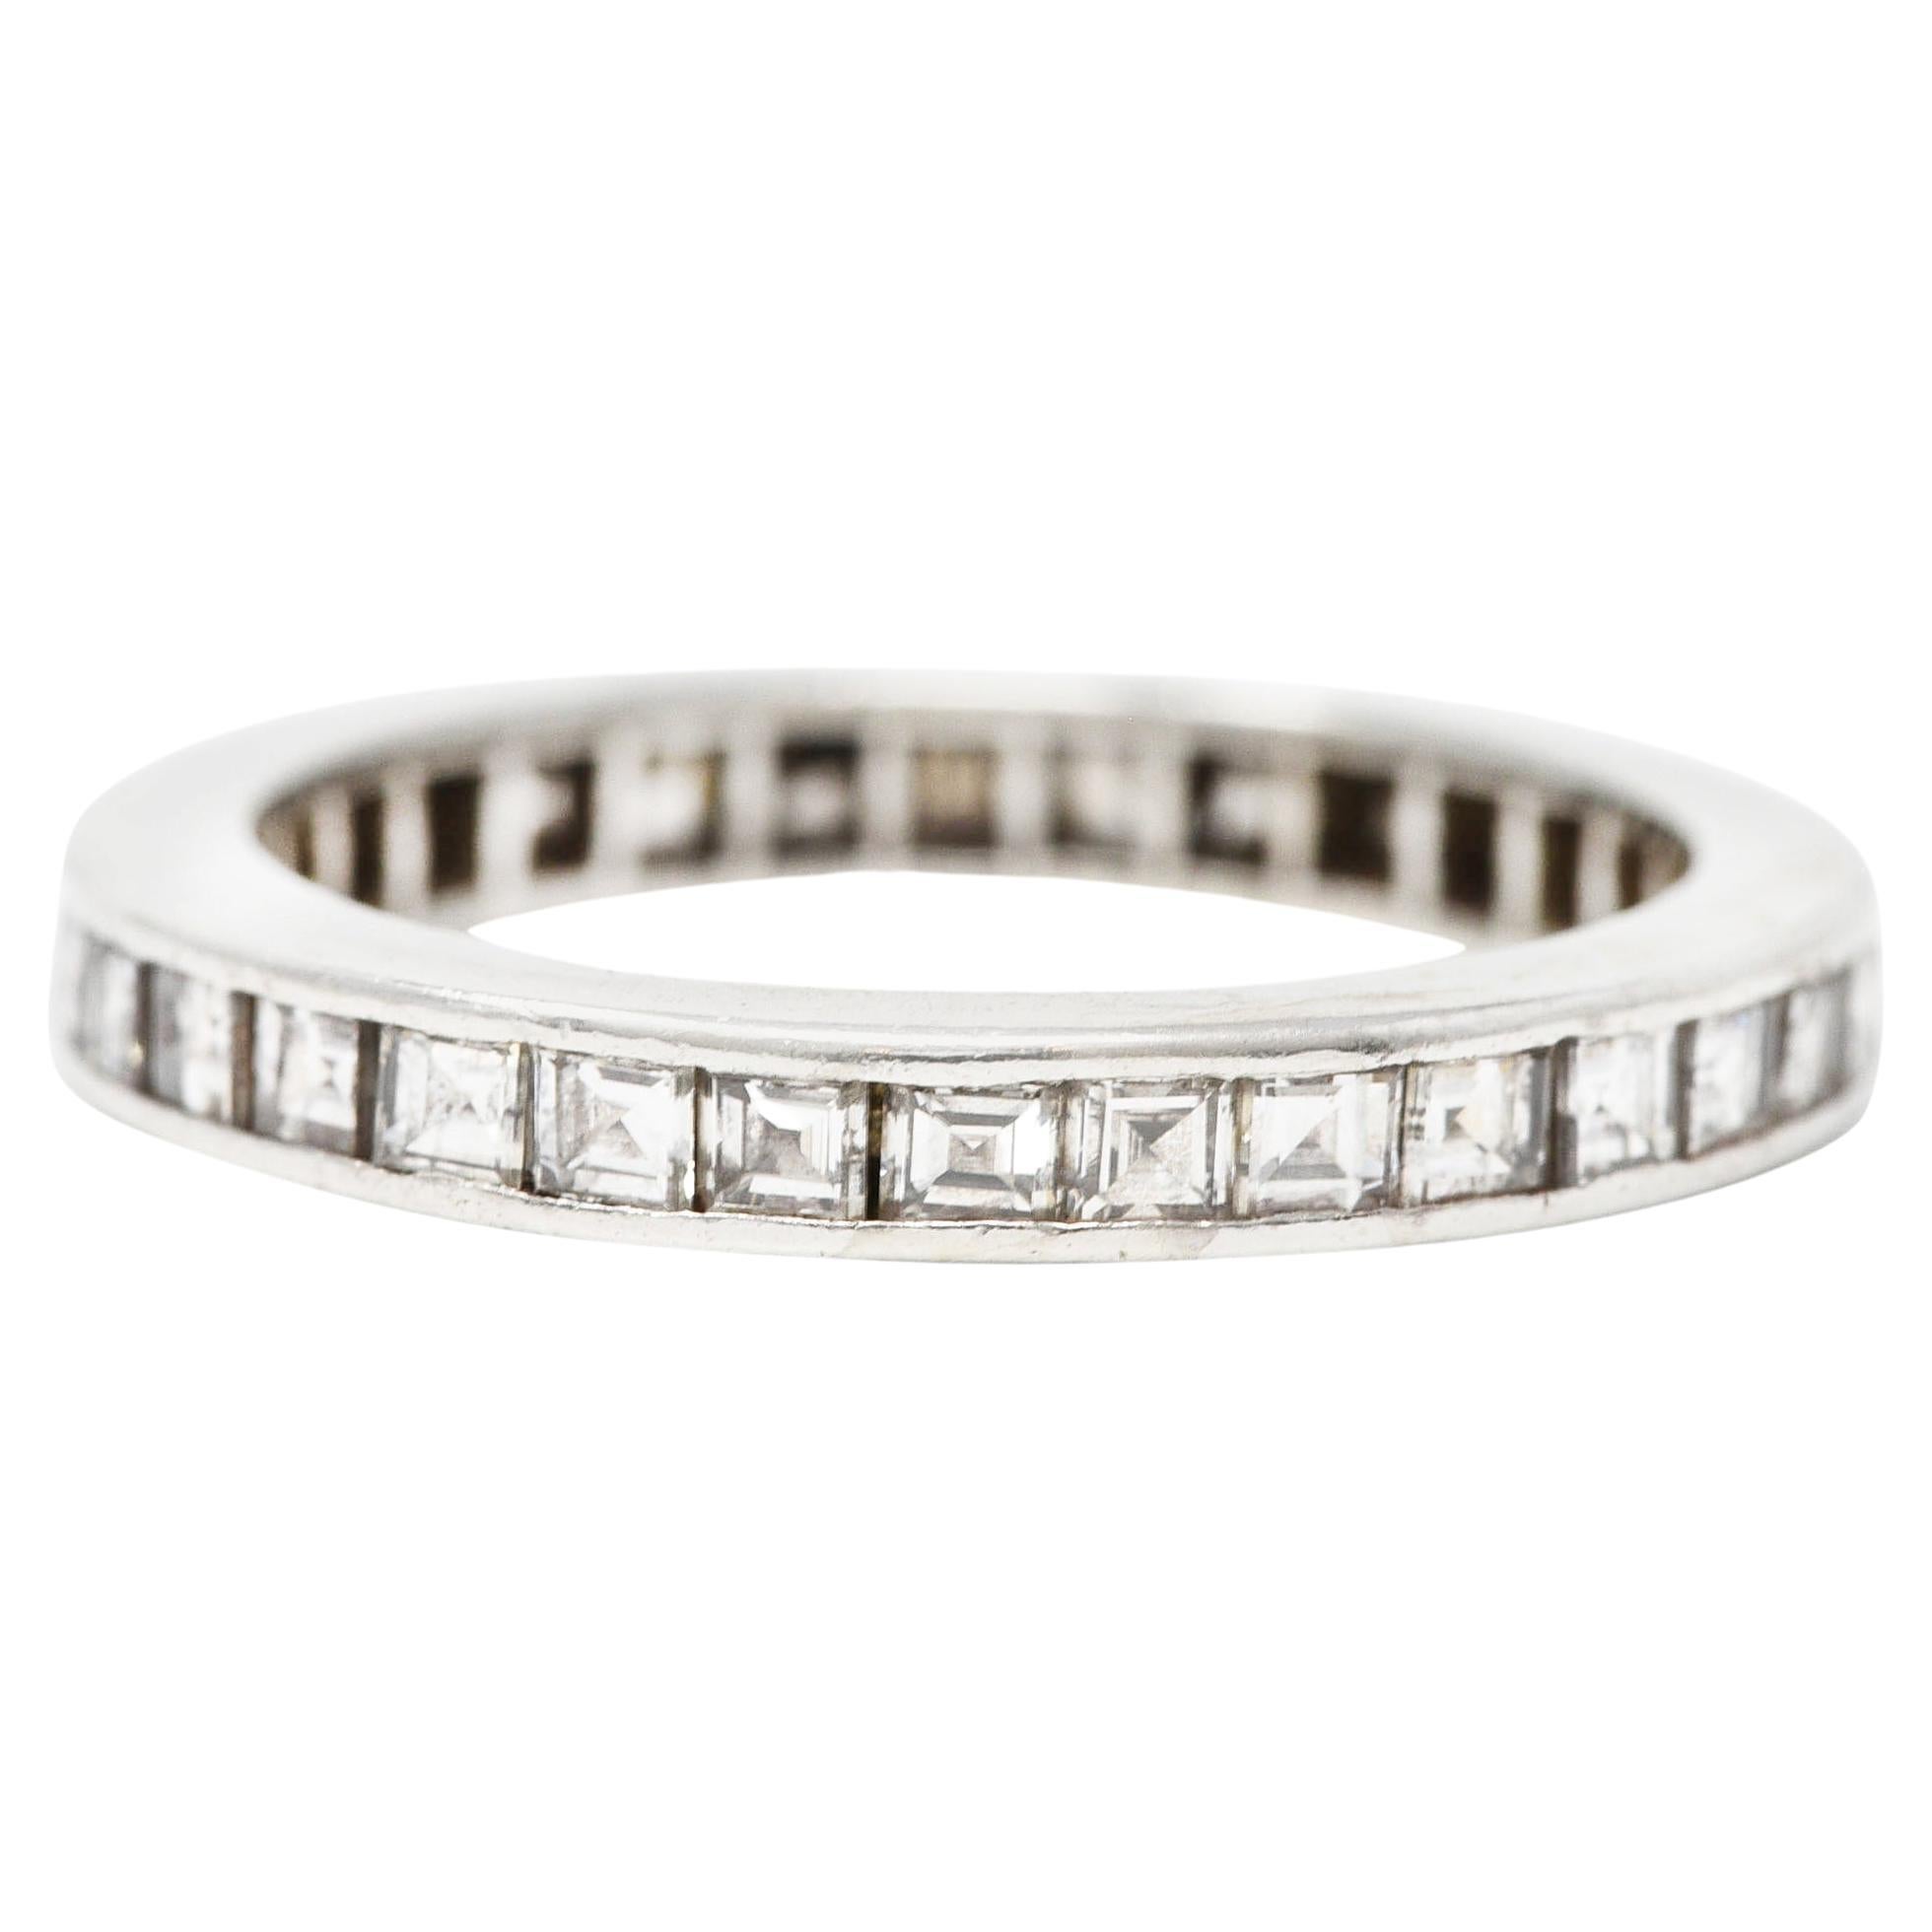 Featuring square step cut diamonds channel set fully around. Weighing approximately 1.48 carats total. H/I color with VS1 clarity. With high polish platinum finish. Tested as platinum. Circa: 1950's. 
Ring size: 6 1/4 and sizable. Measures North to